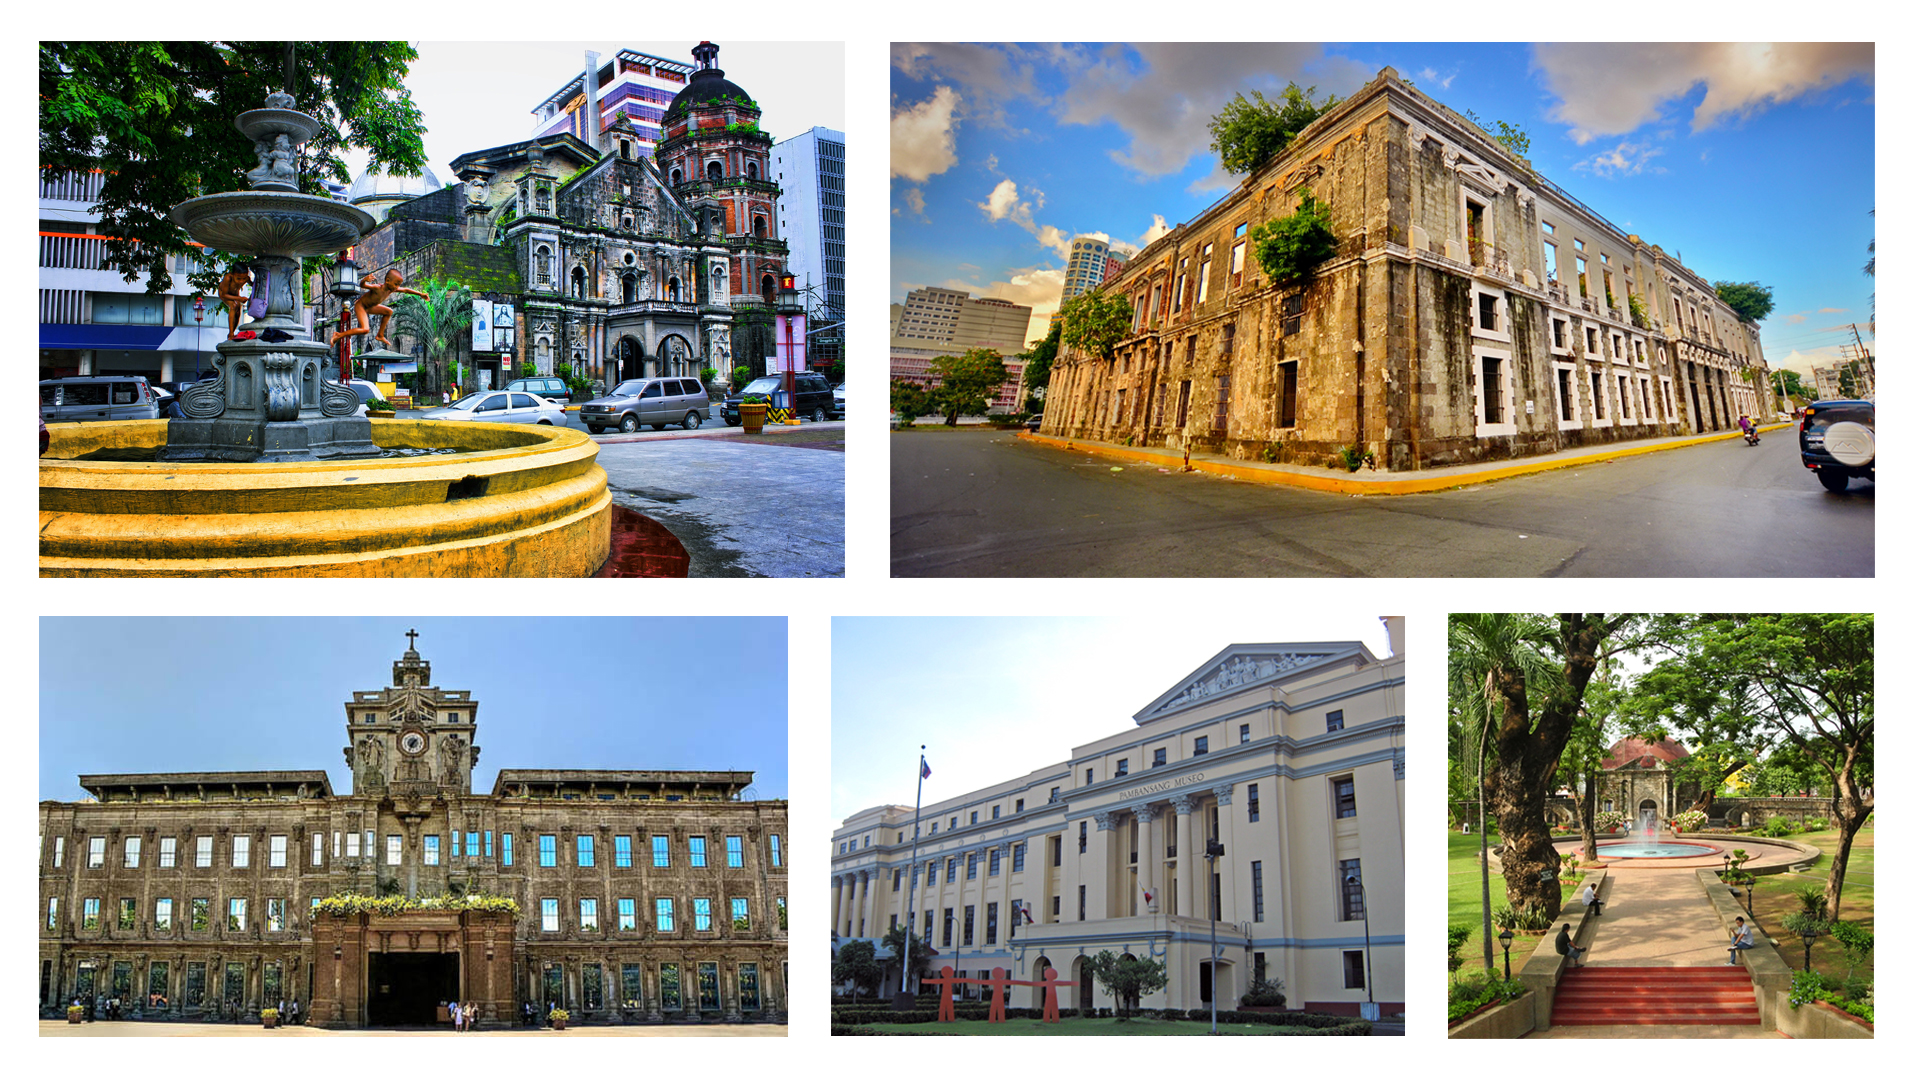 Intramuros, Binondo, Paco Park, National Museum, UST Campus, Smart, Independence Day, Promo